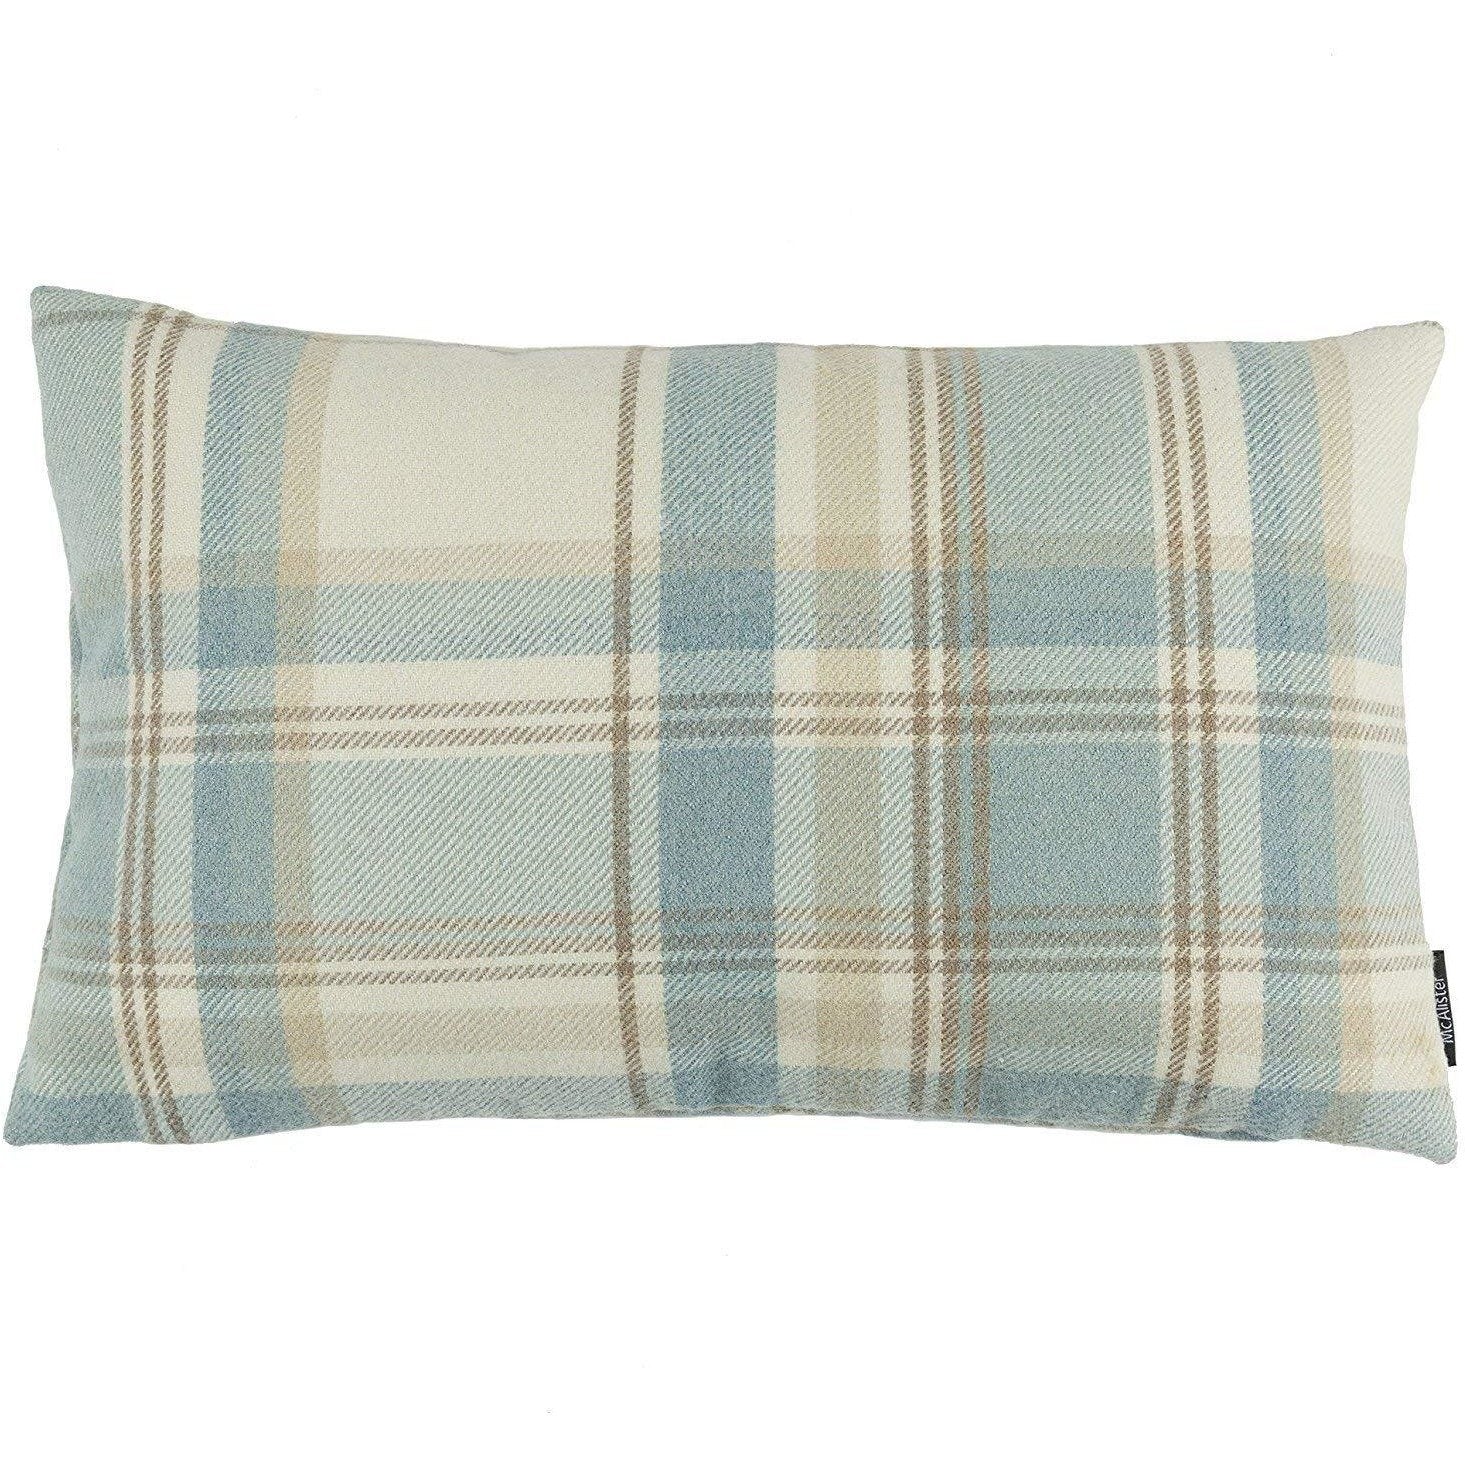 McAlister Textiles Heritage Duck Egg Blue Tartan Cushion Cushions and Covers Cover Only 50cm x 30cm 